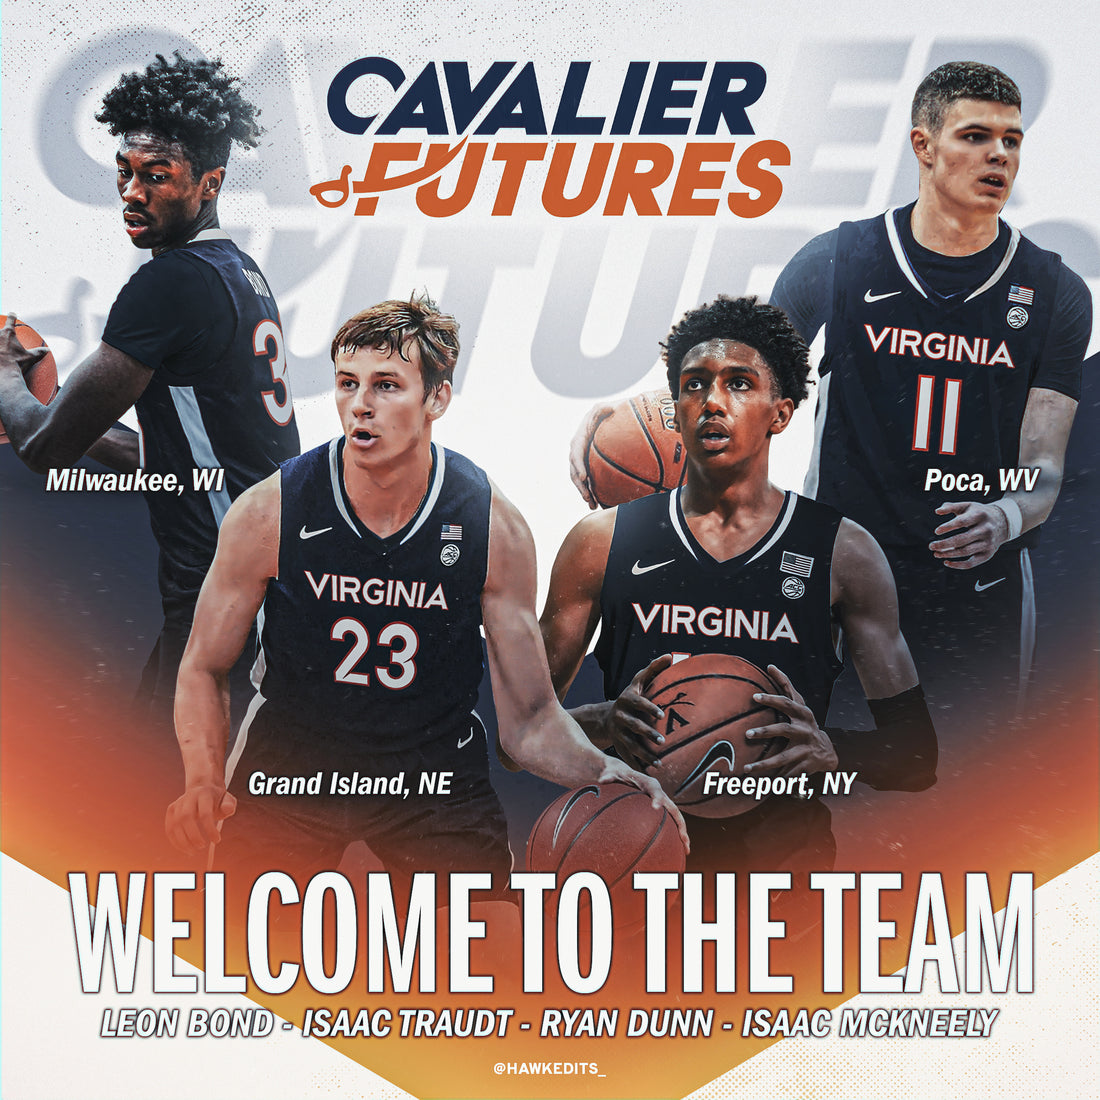 Cavalier Futures Hosts First Virtual Cav Club Exclusive Event